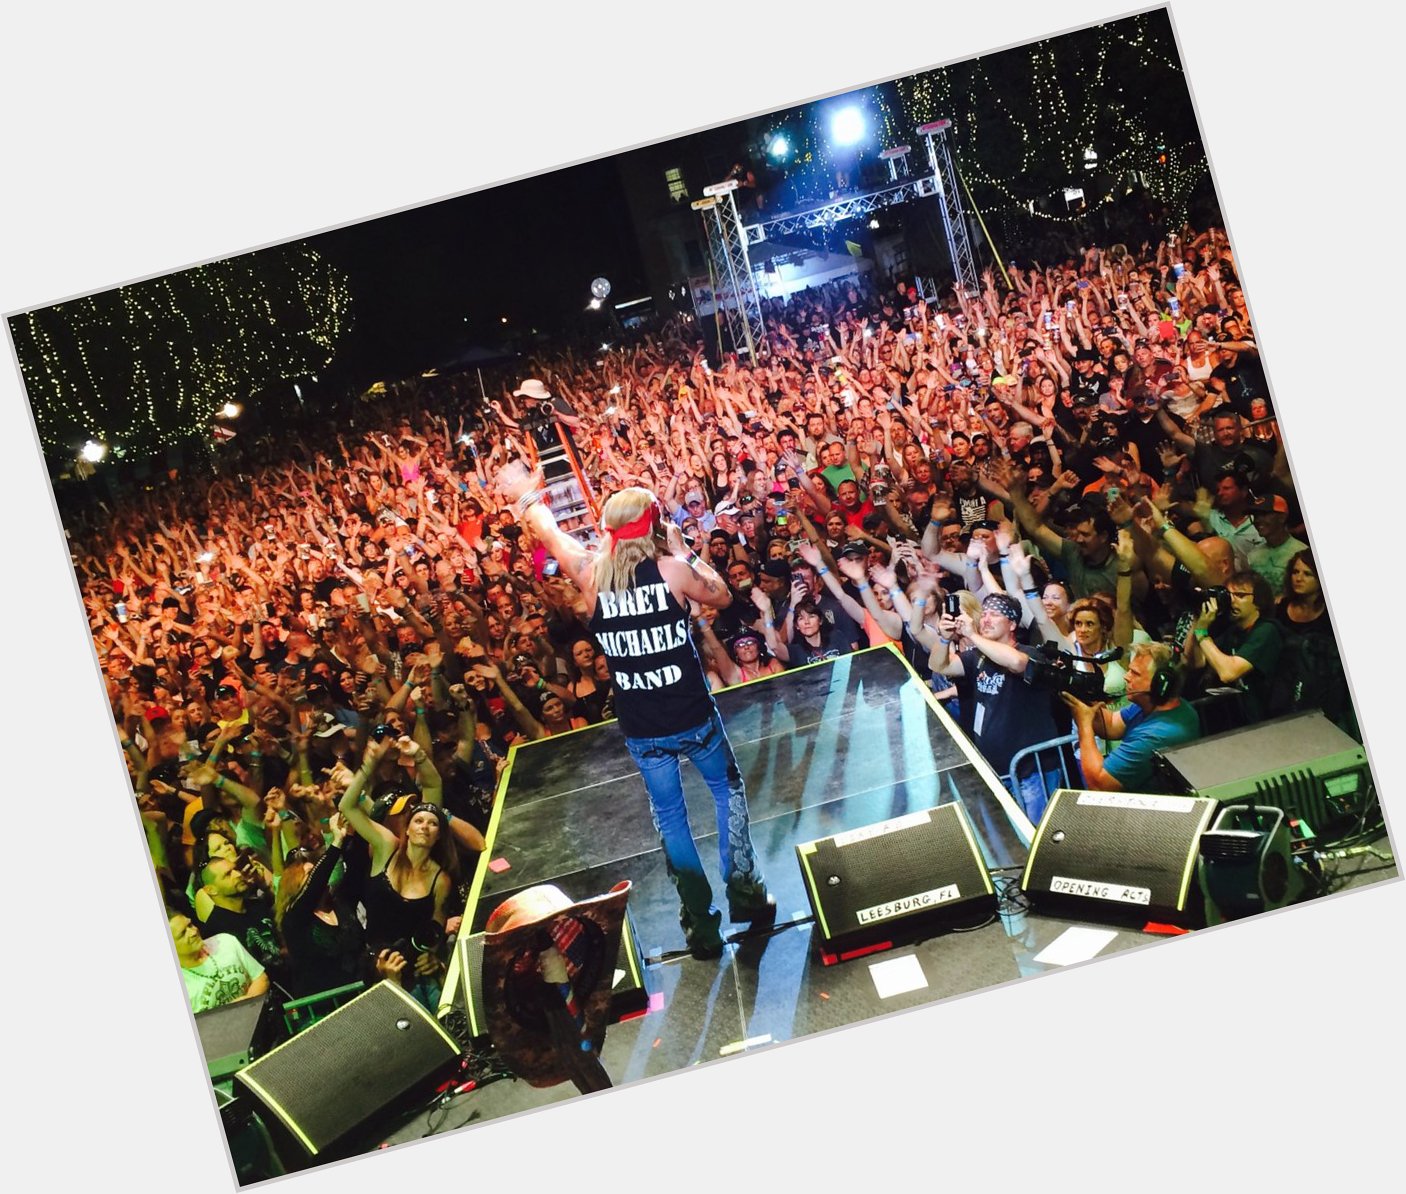 Happy Birthday to Bret Michaels, who rocked out with us for last year\s Leesburg Bikefest! 